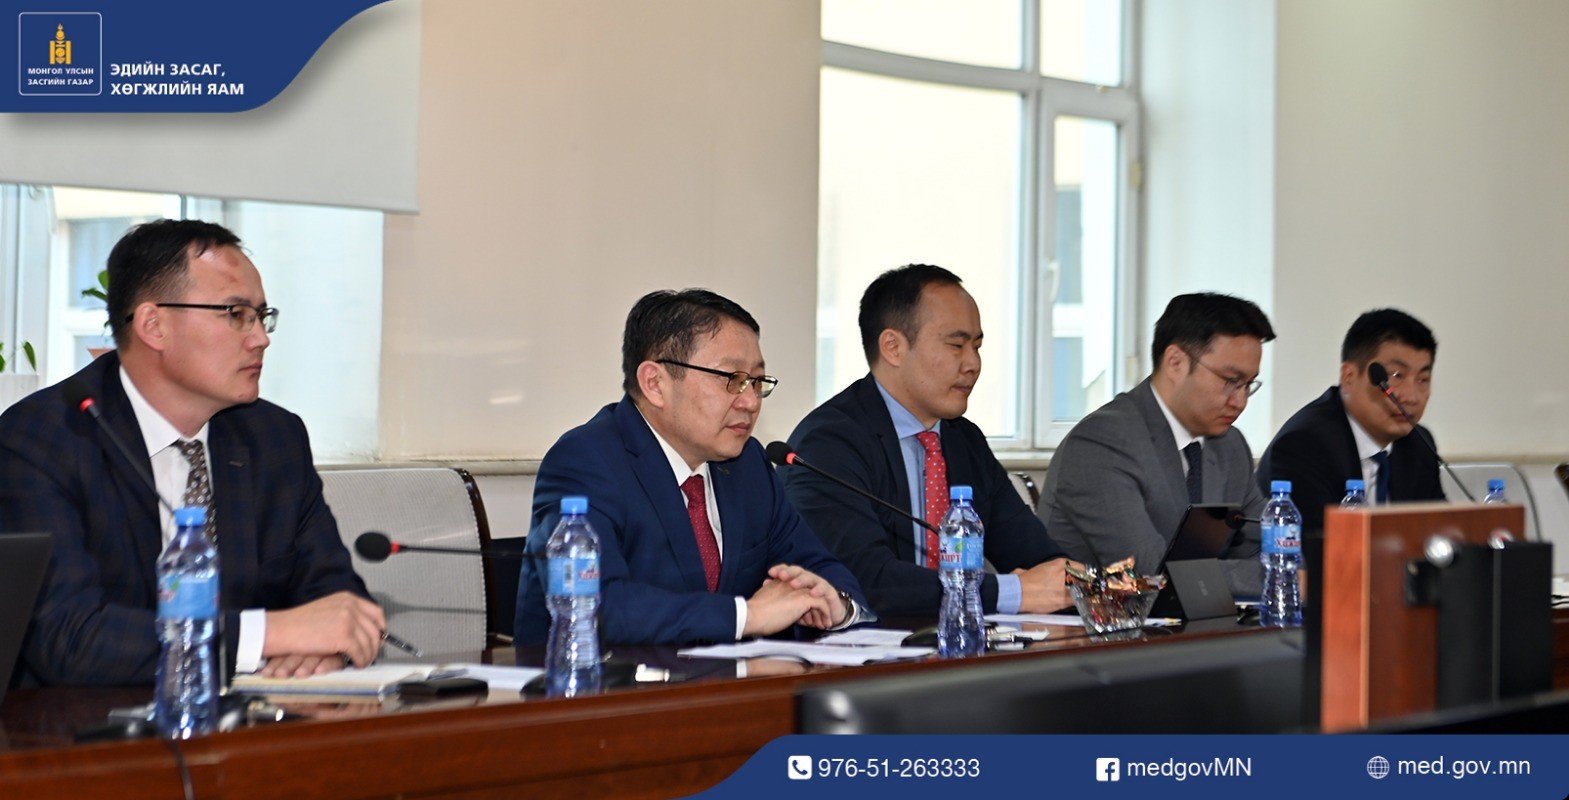 VICE MINISTER OF THE MINISTRY OF ECONOMY AND DEVELOPMENT RECEIVES ...